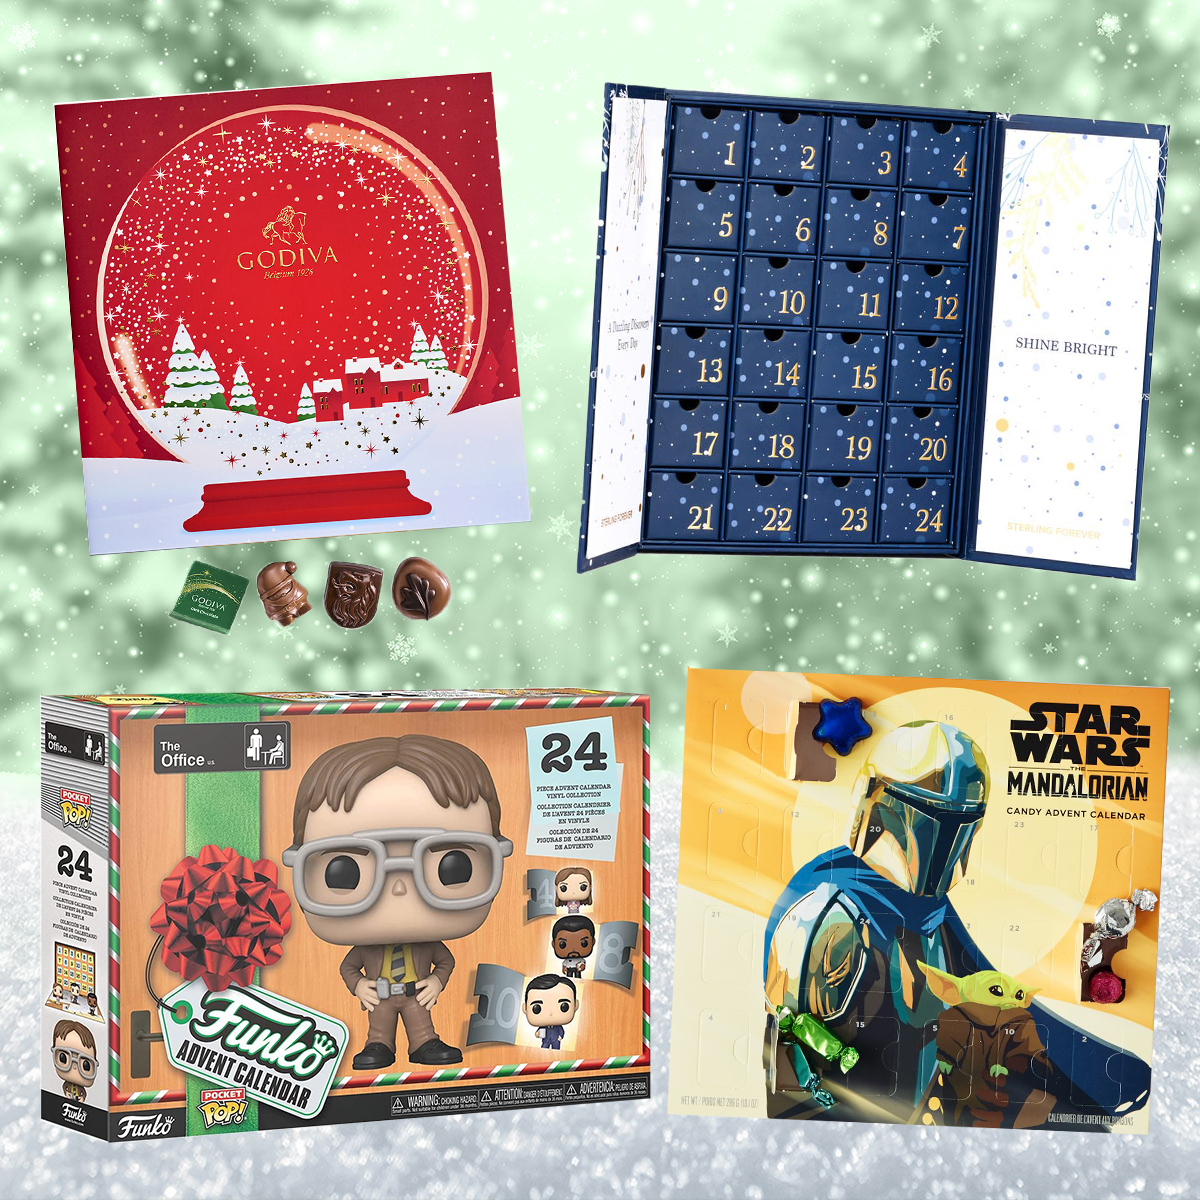 Must-Have Advent Calendars To Get Before December